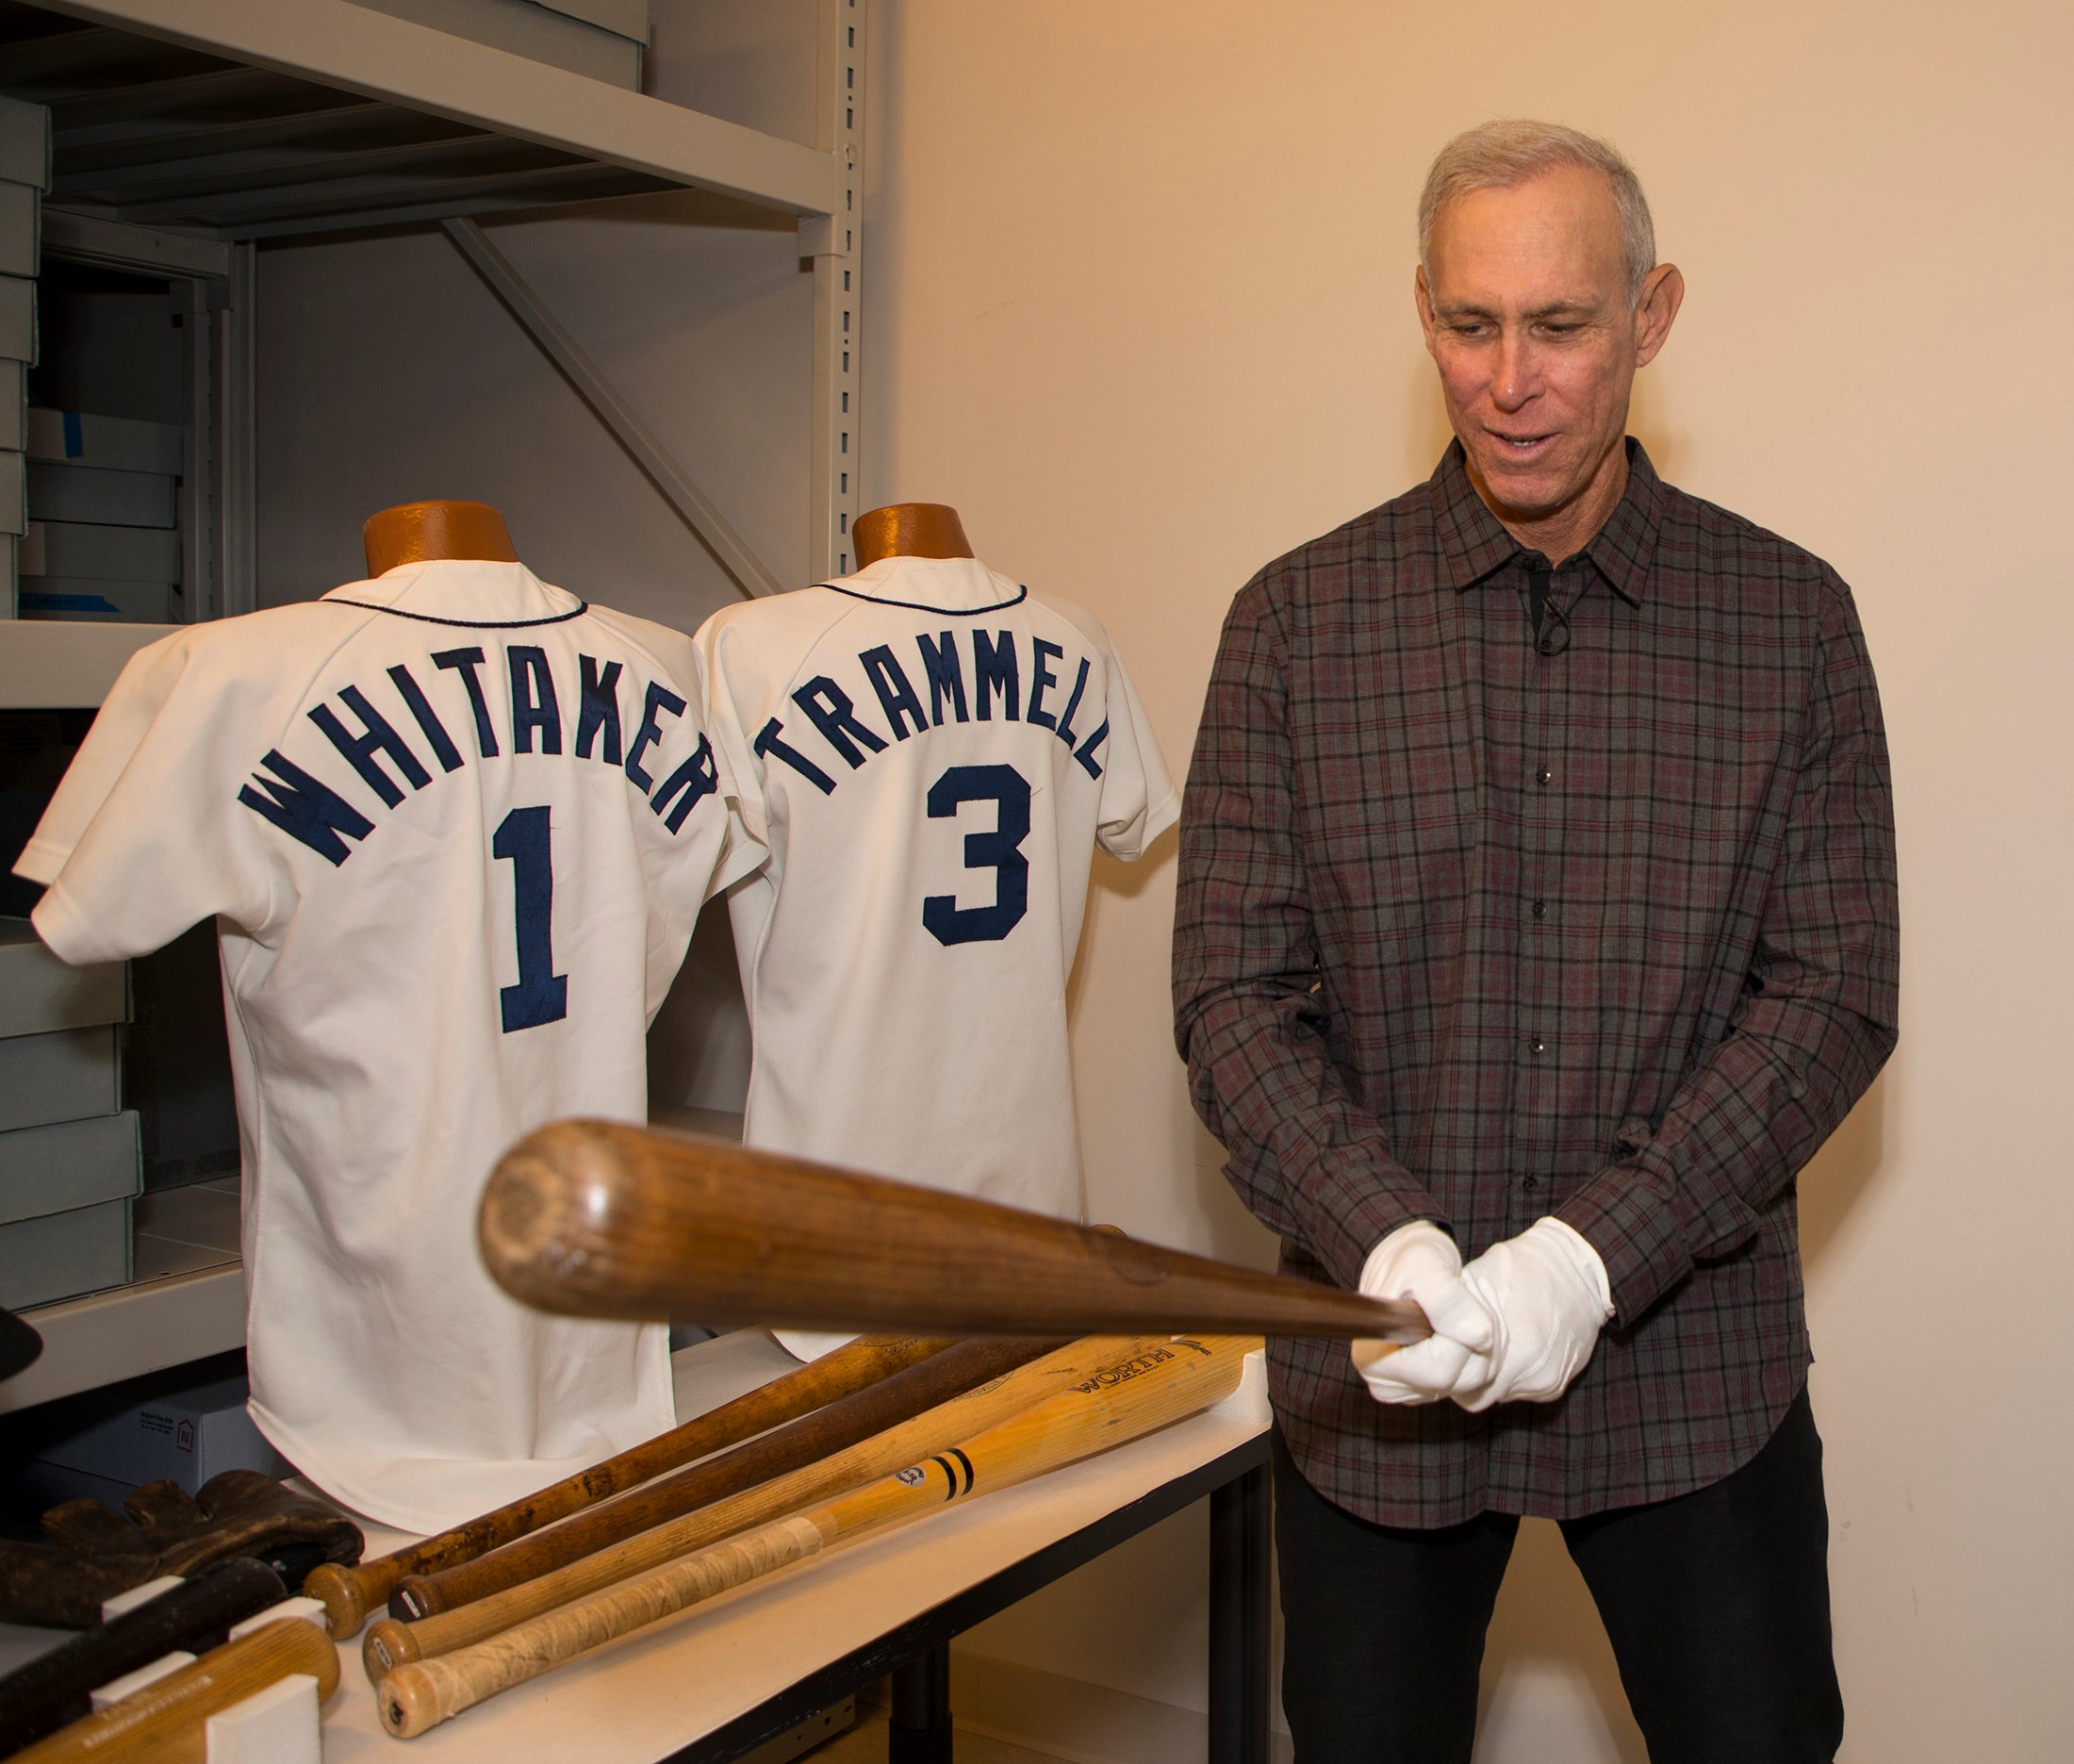 Trammell’s dream comes true with visit to Hall